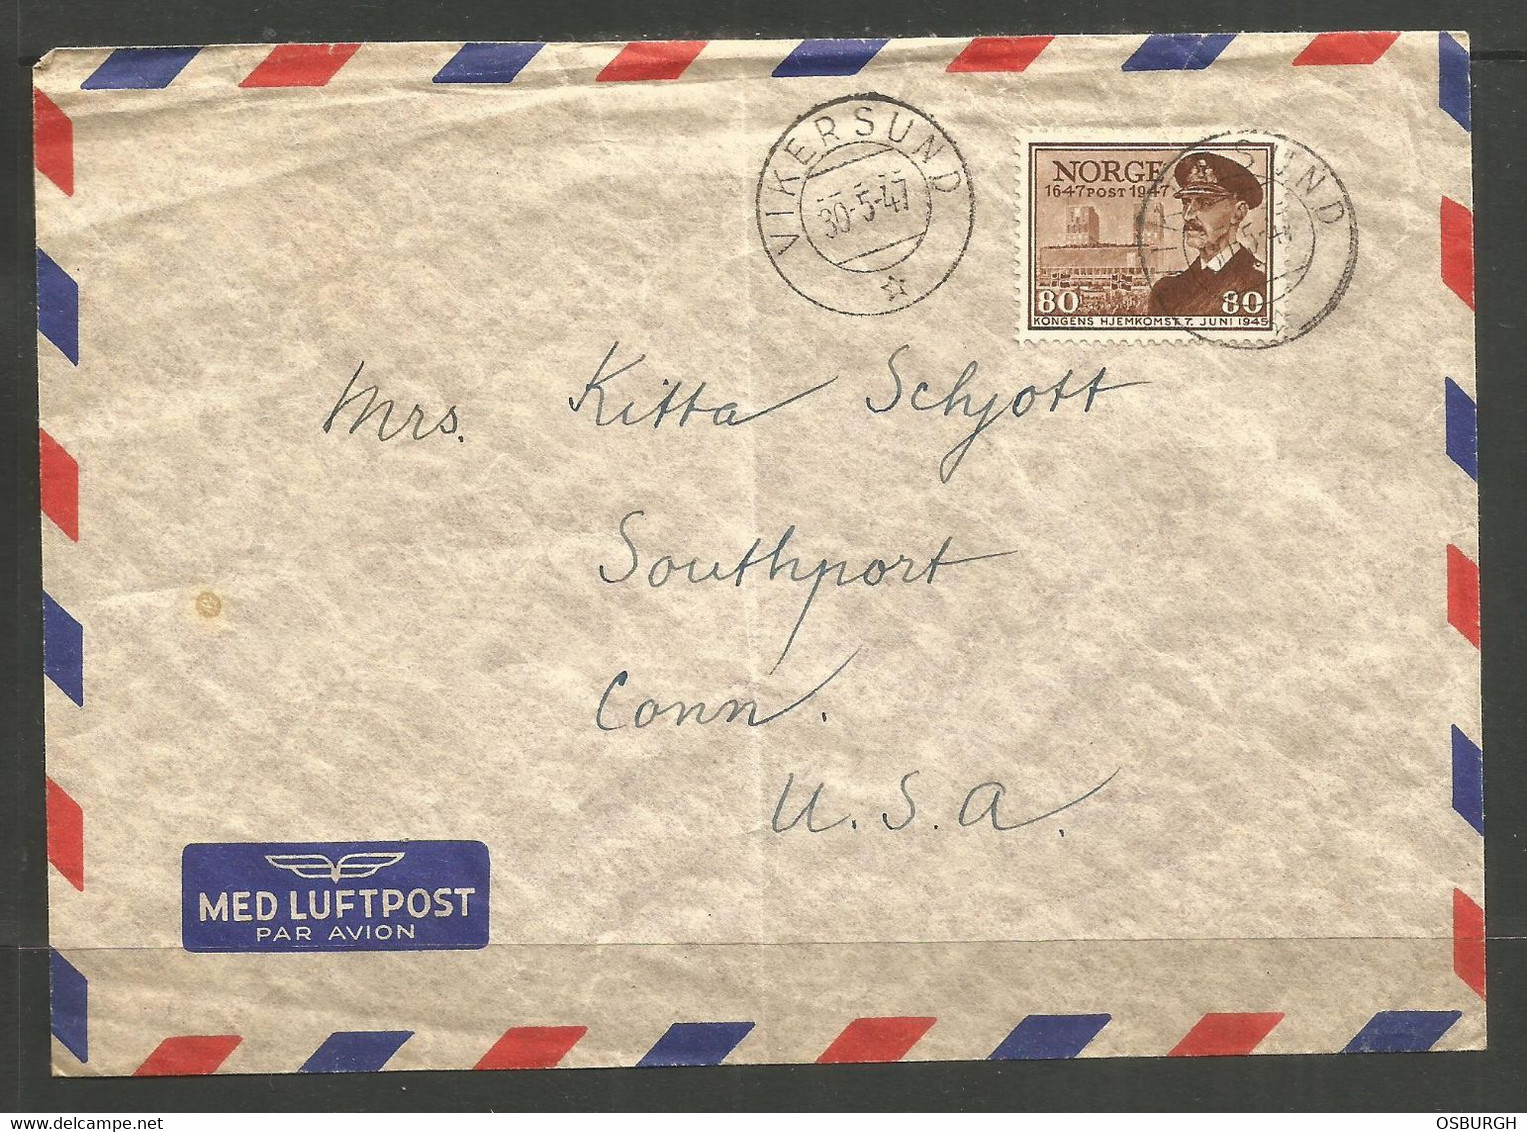 NORWAY. 1947. AIR MAIL COVER. VIKERSUND TO SOUTHPORT CONNECTICUT - Covers & Documents